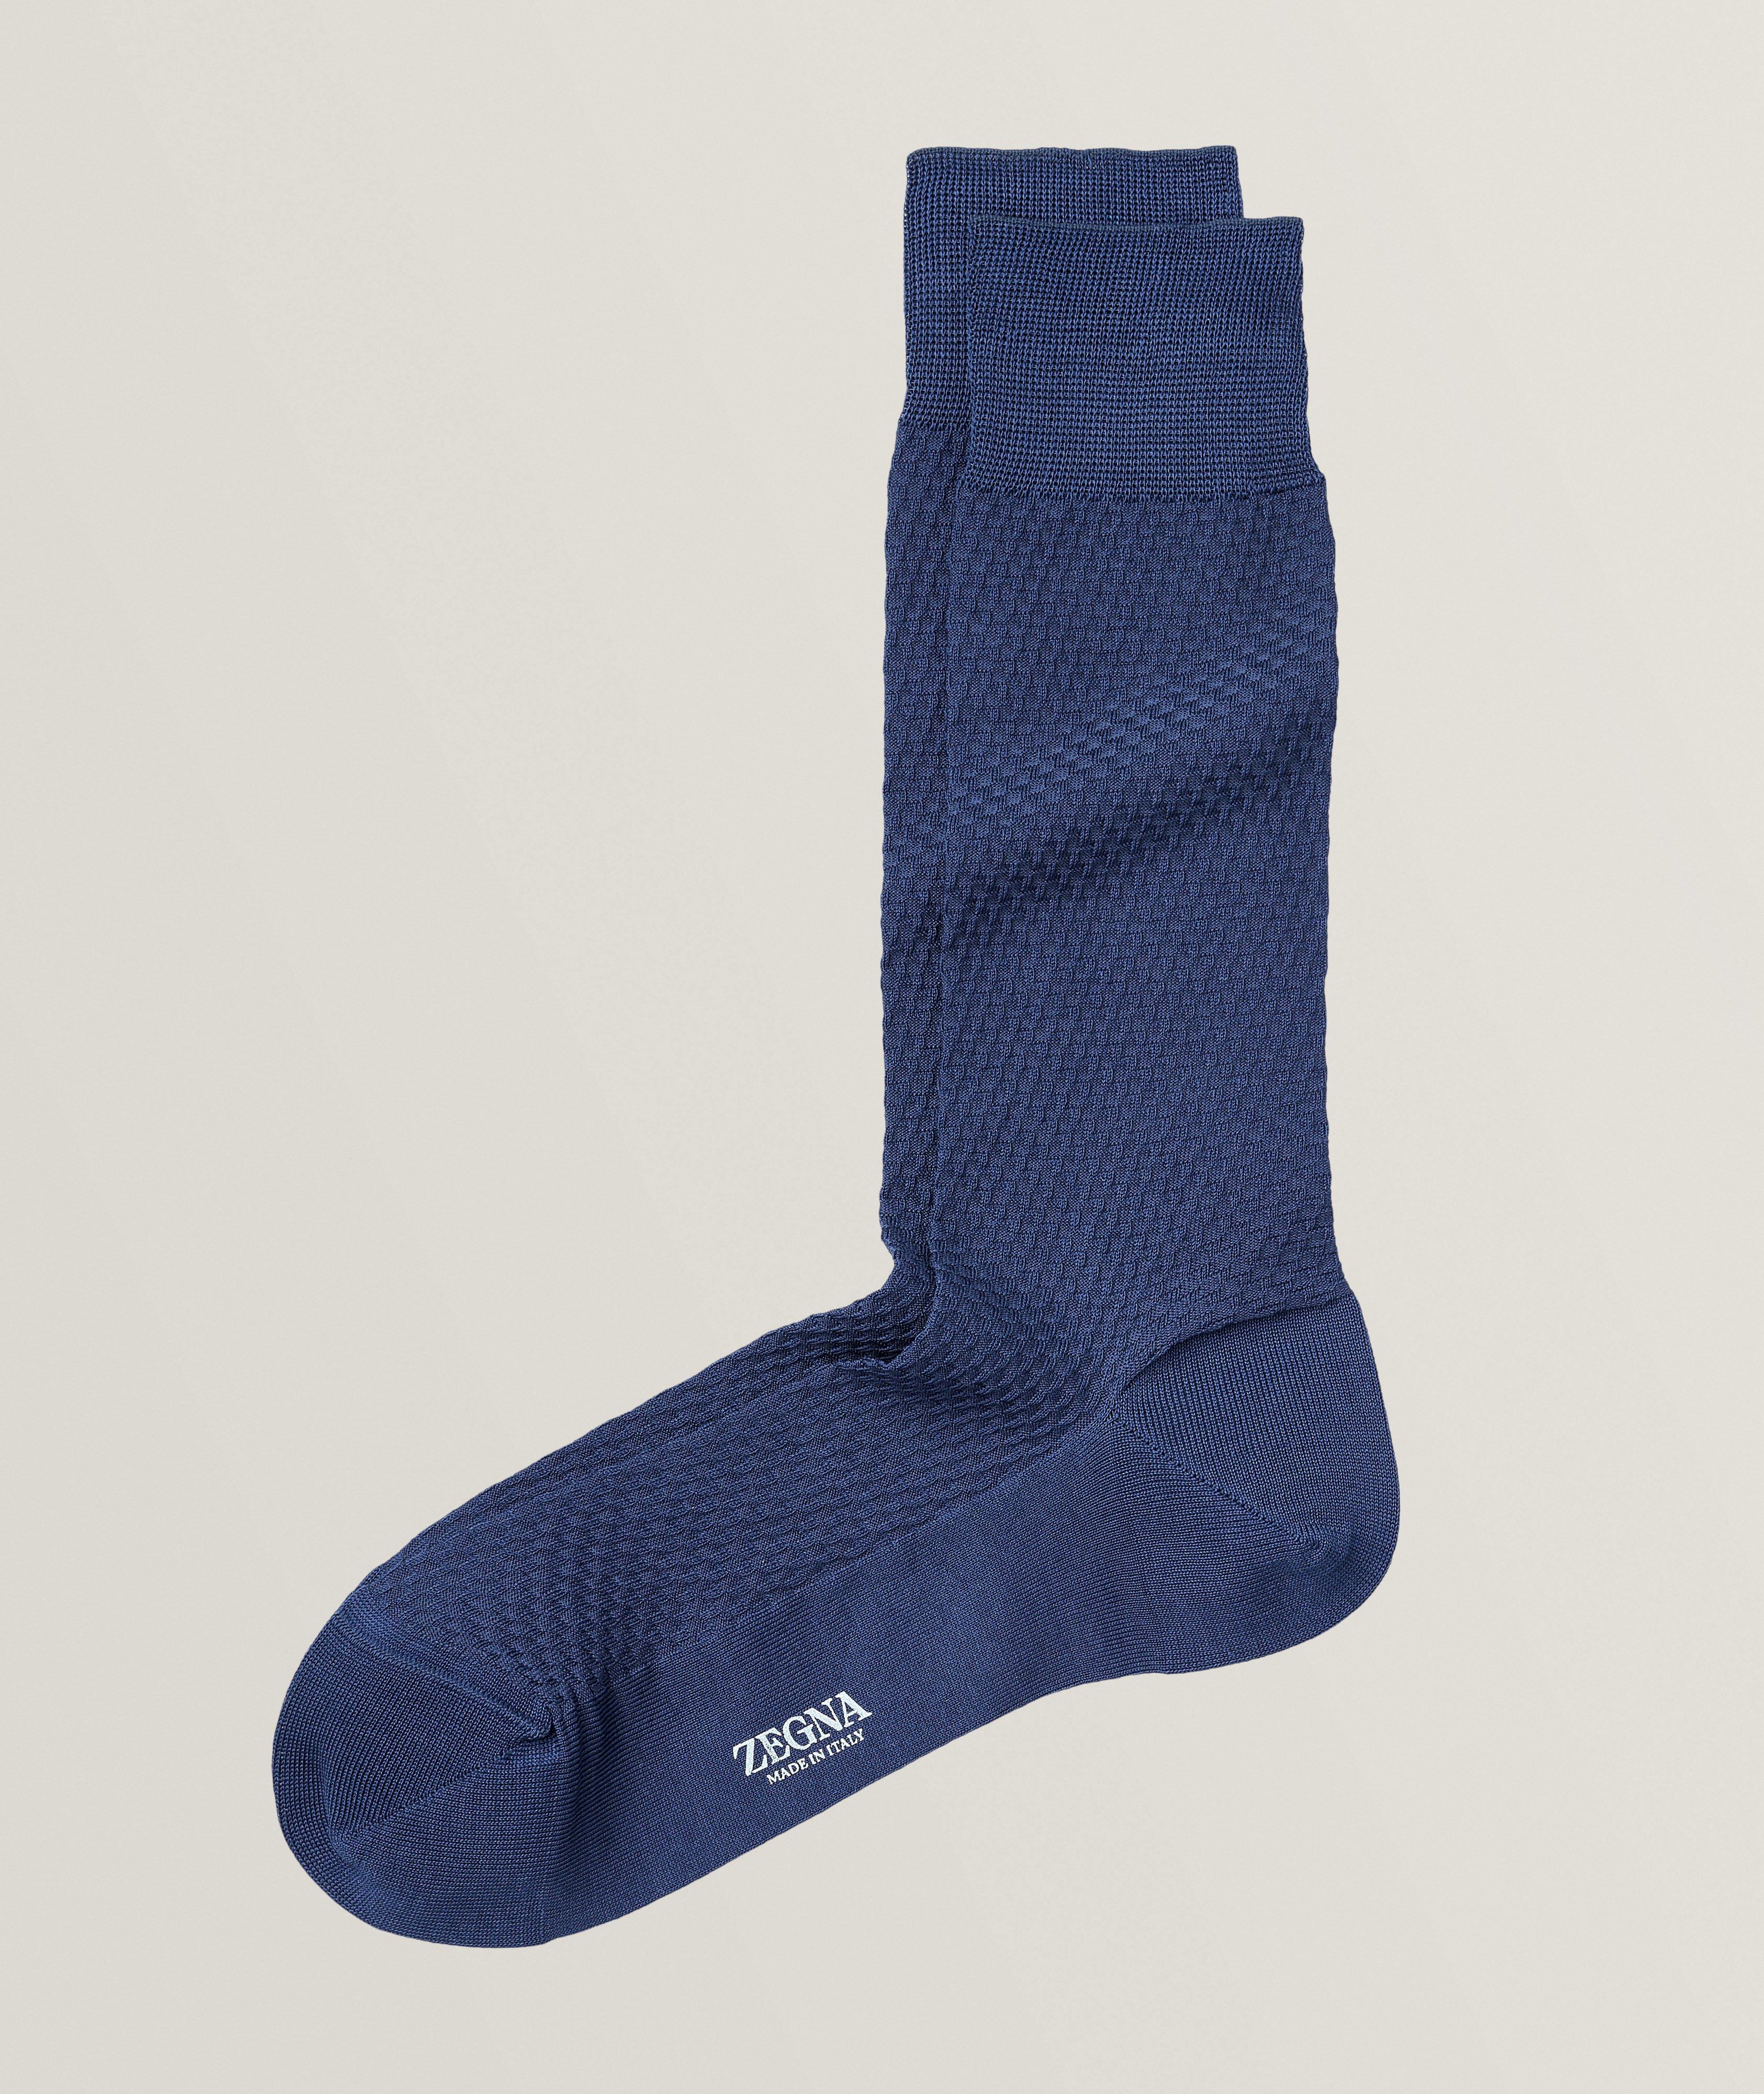 Texture First Stretch-Cotton Blend Socks  image 0